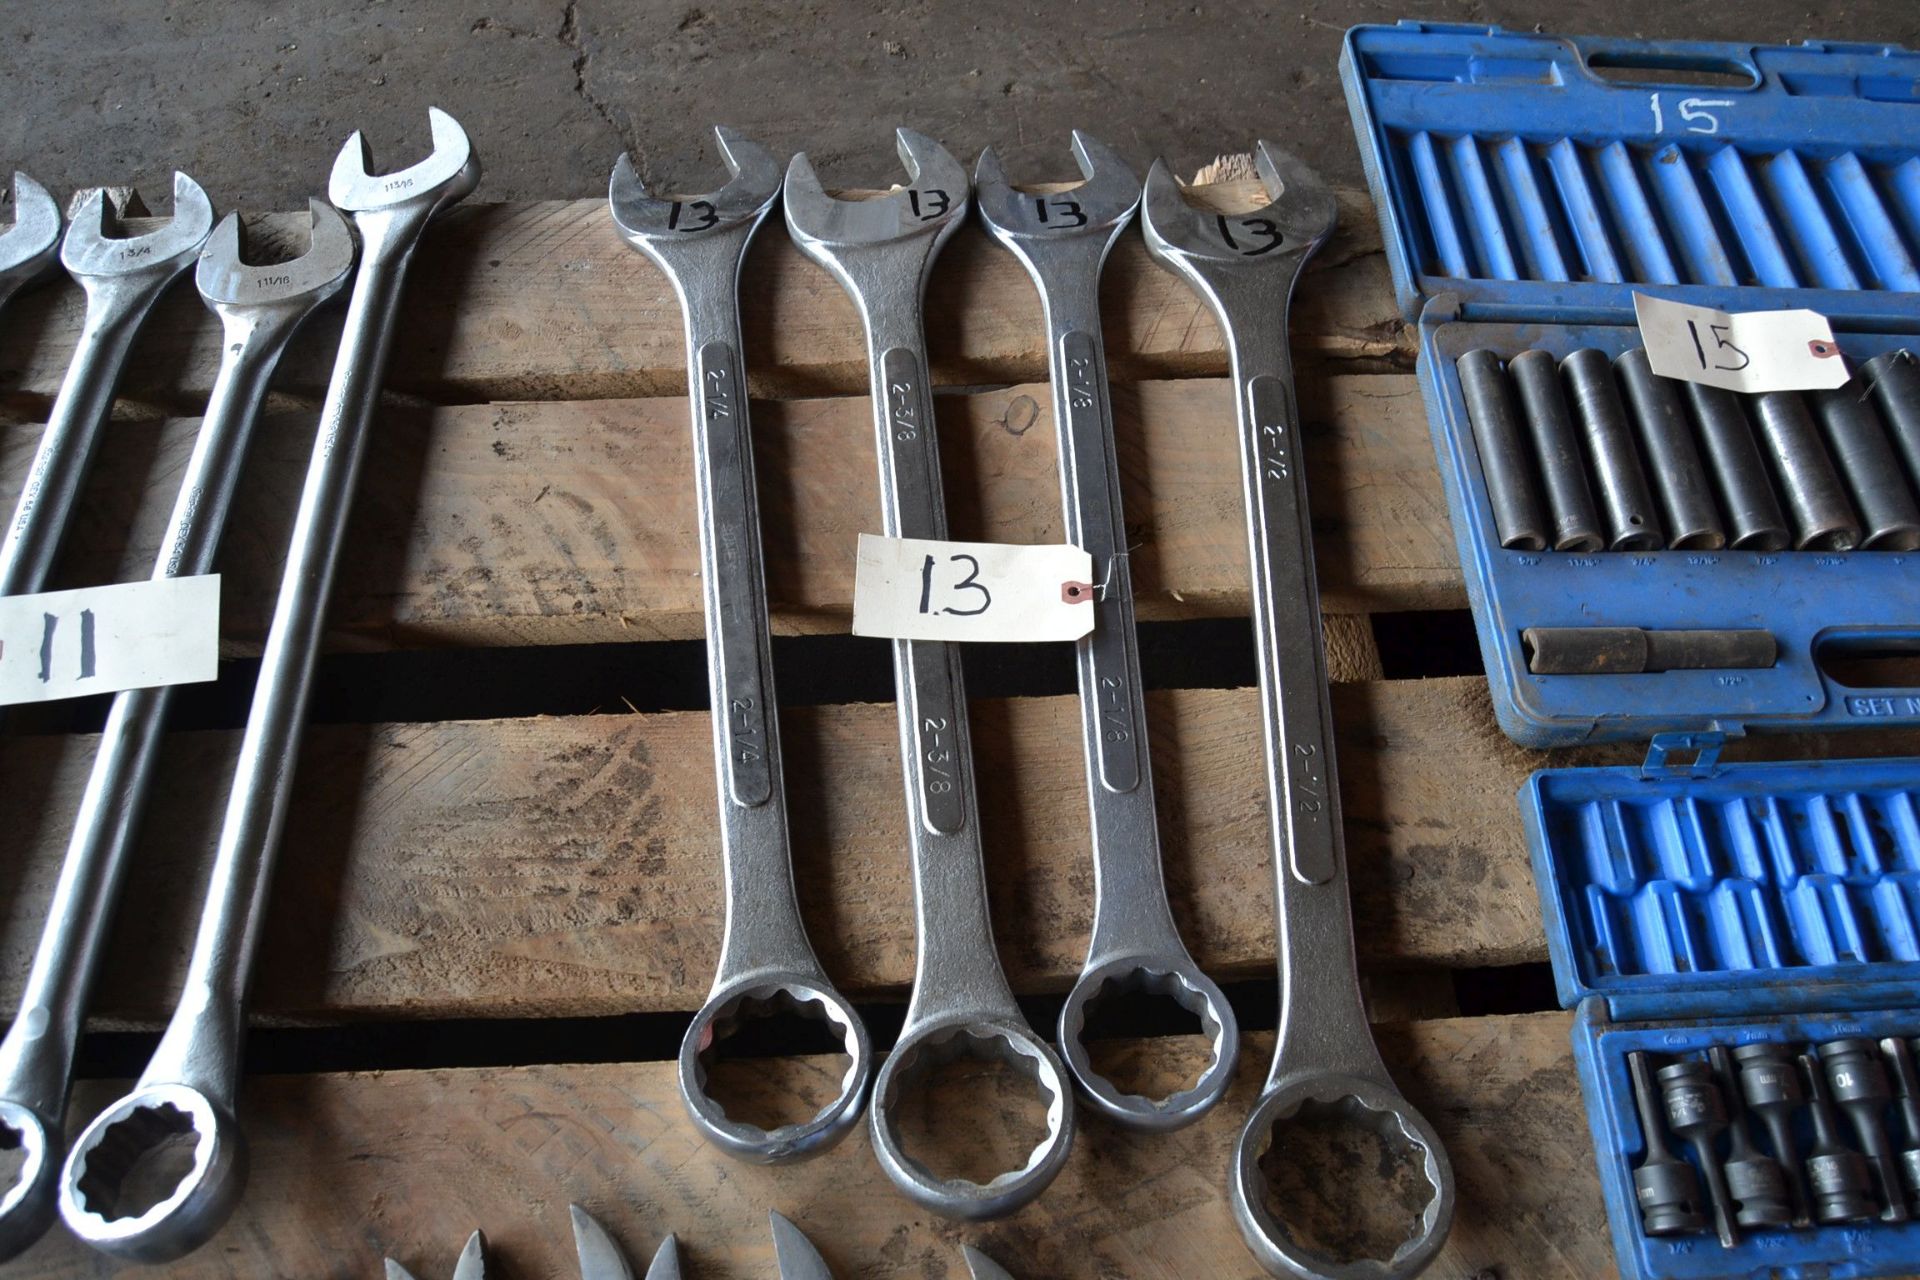 (4) BIG WRENCHES (2 1/8) (2 1/4) (2 3/8) (2 1/2)